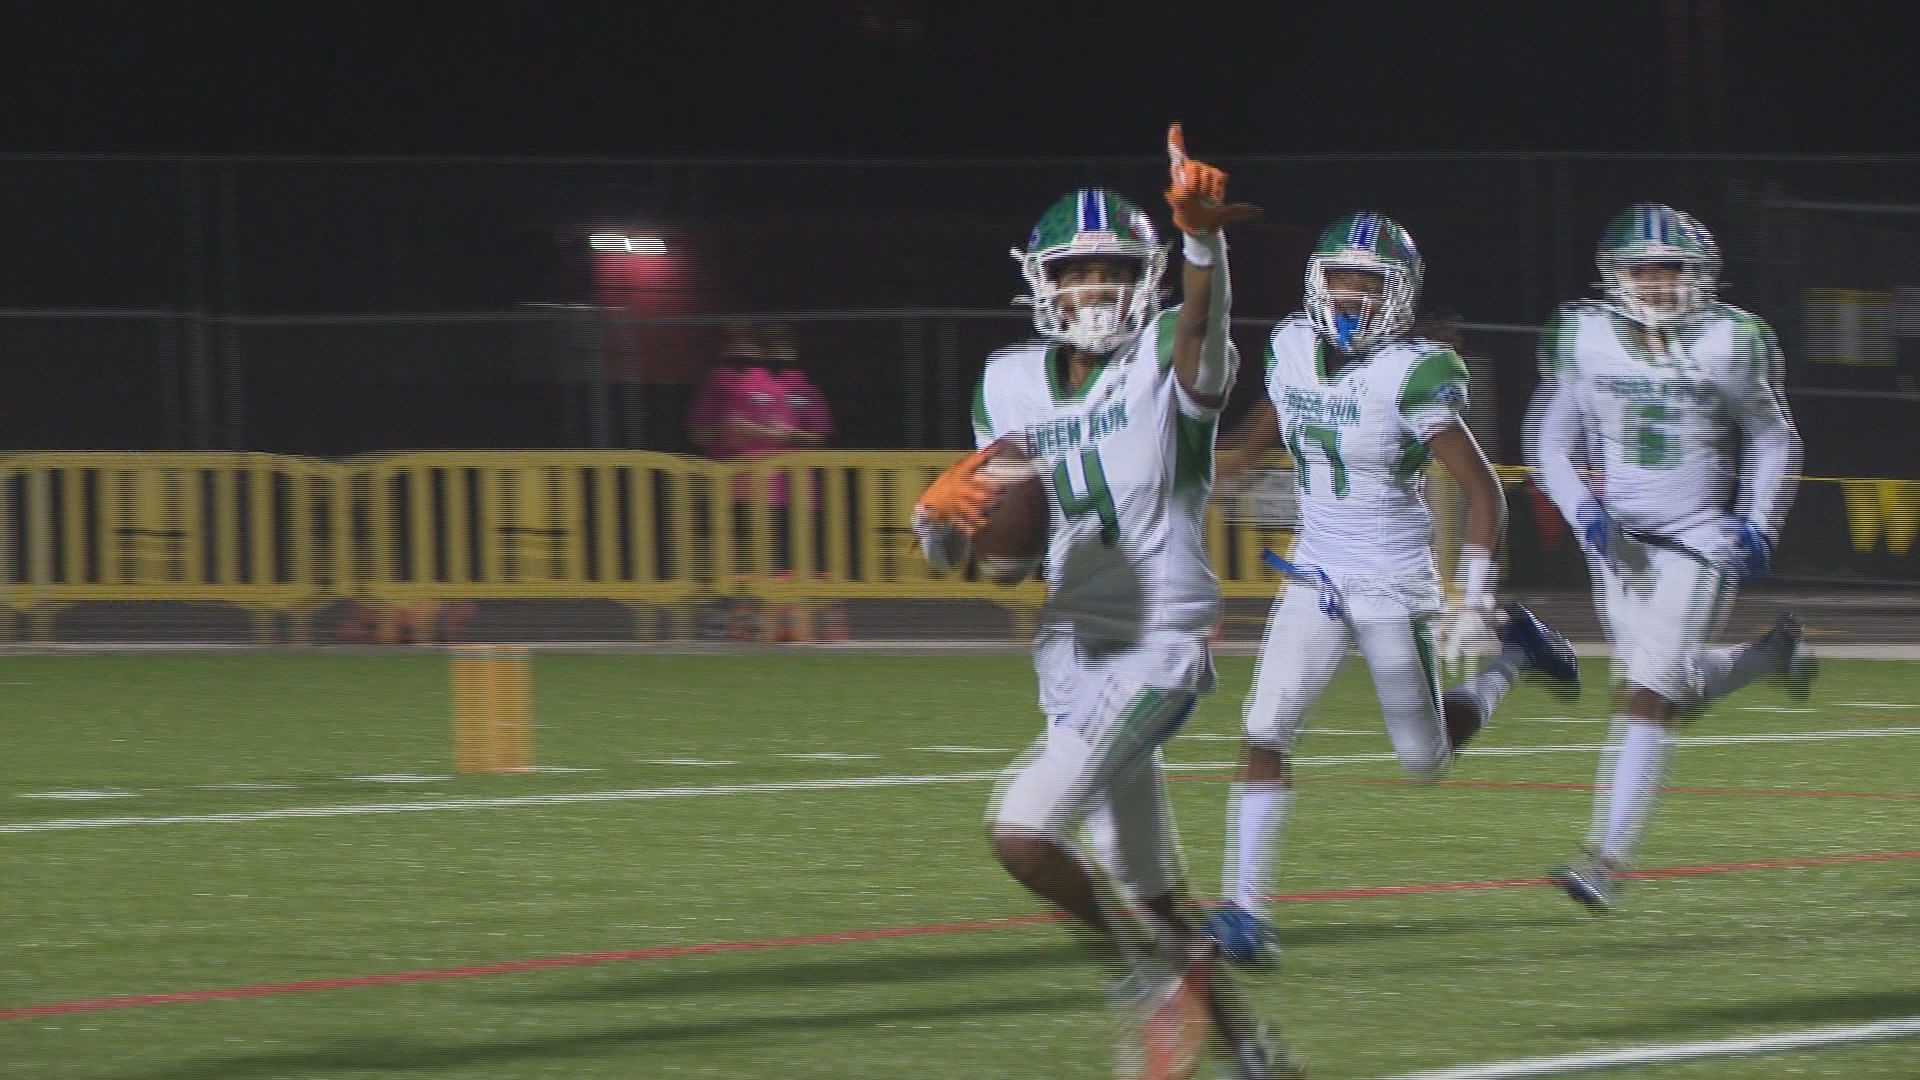 The senior defensive back had 2 interceptions, one he ran back for a score as Green Run blanked Bayside 35-0.